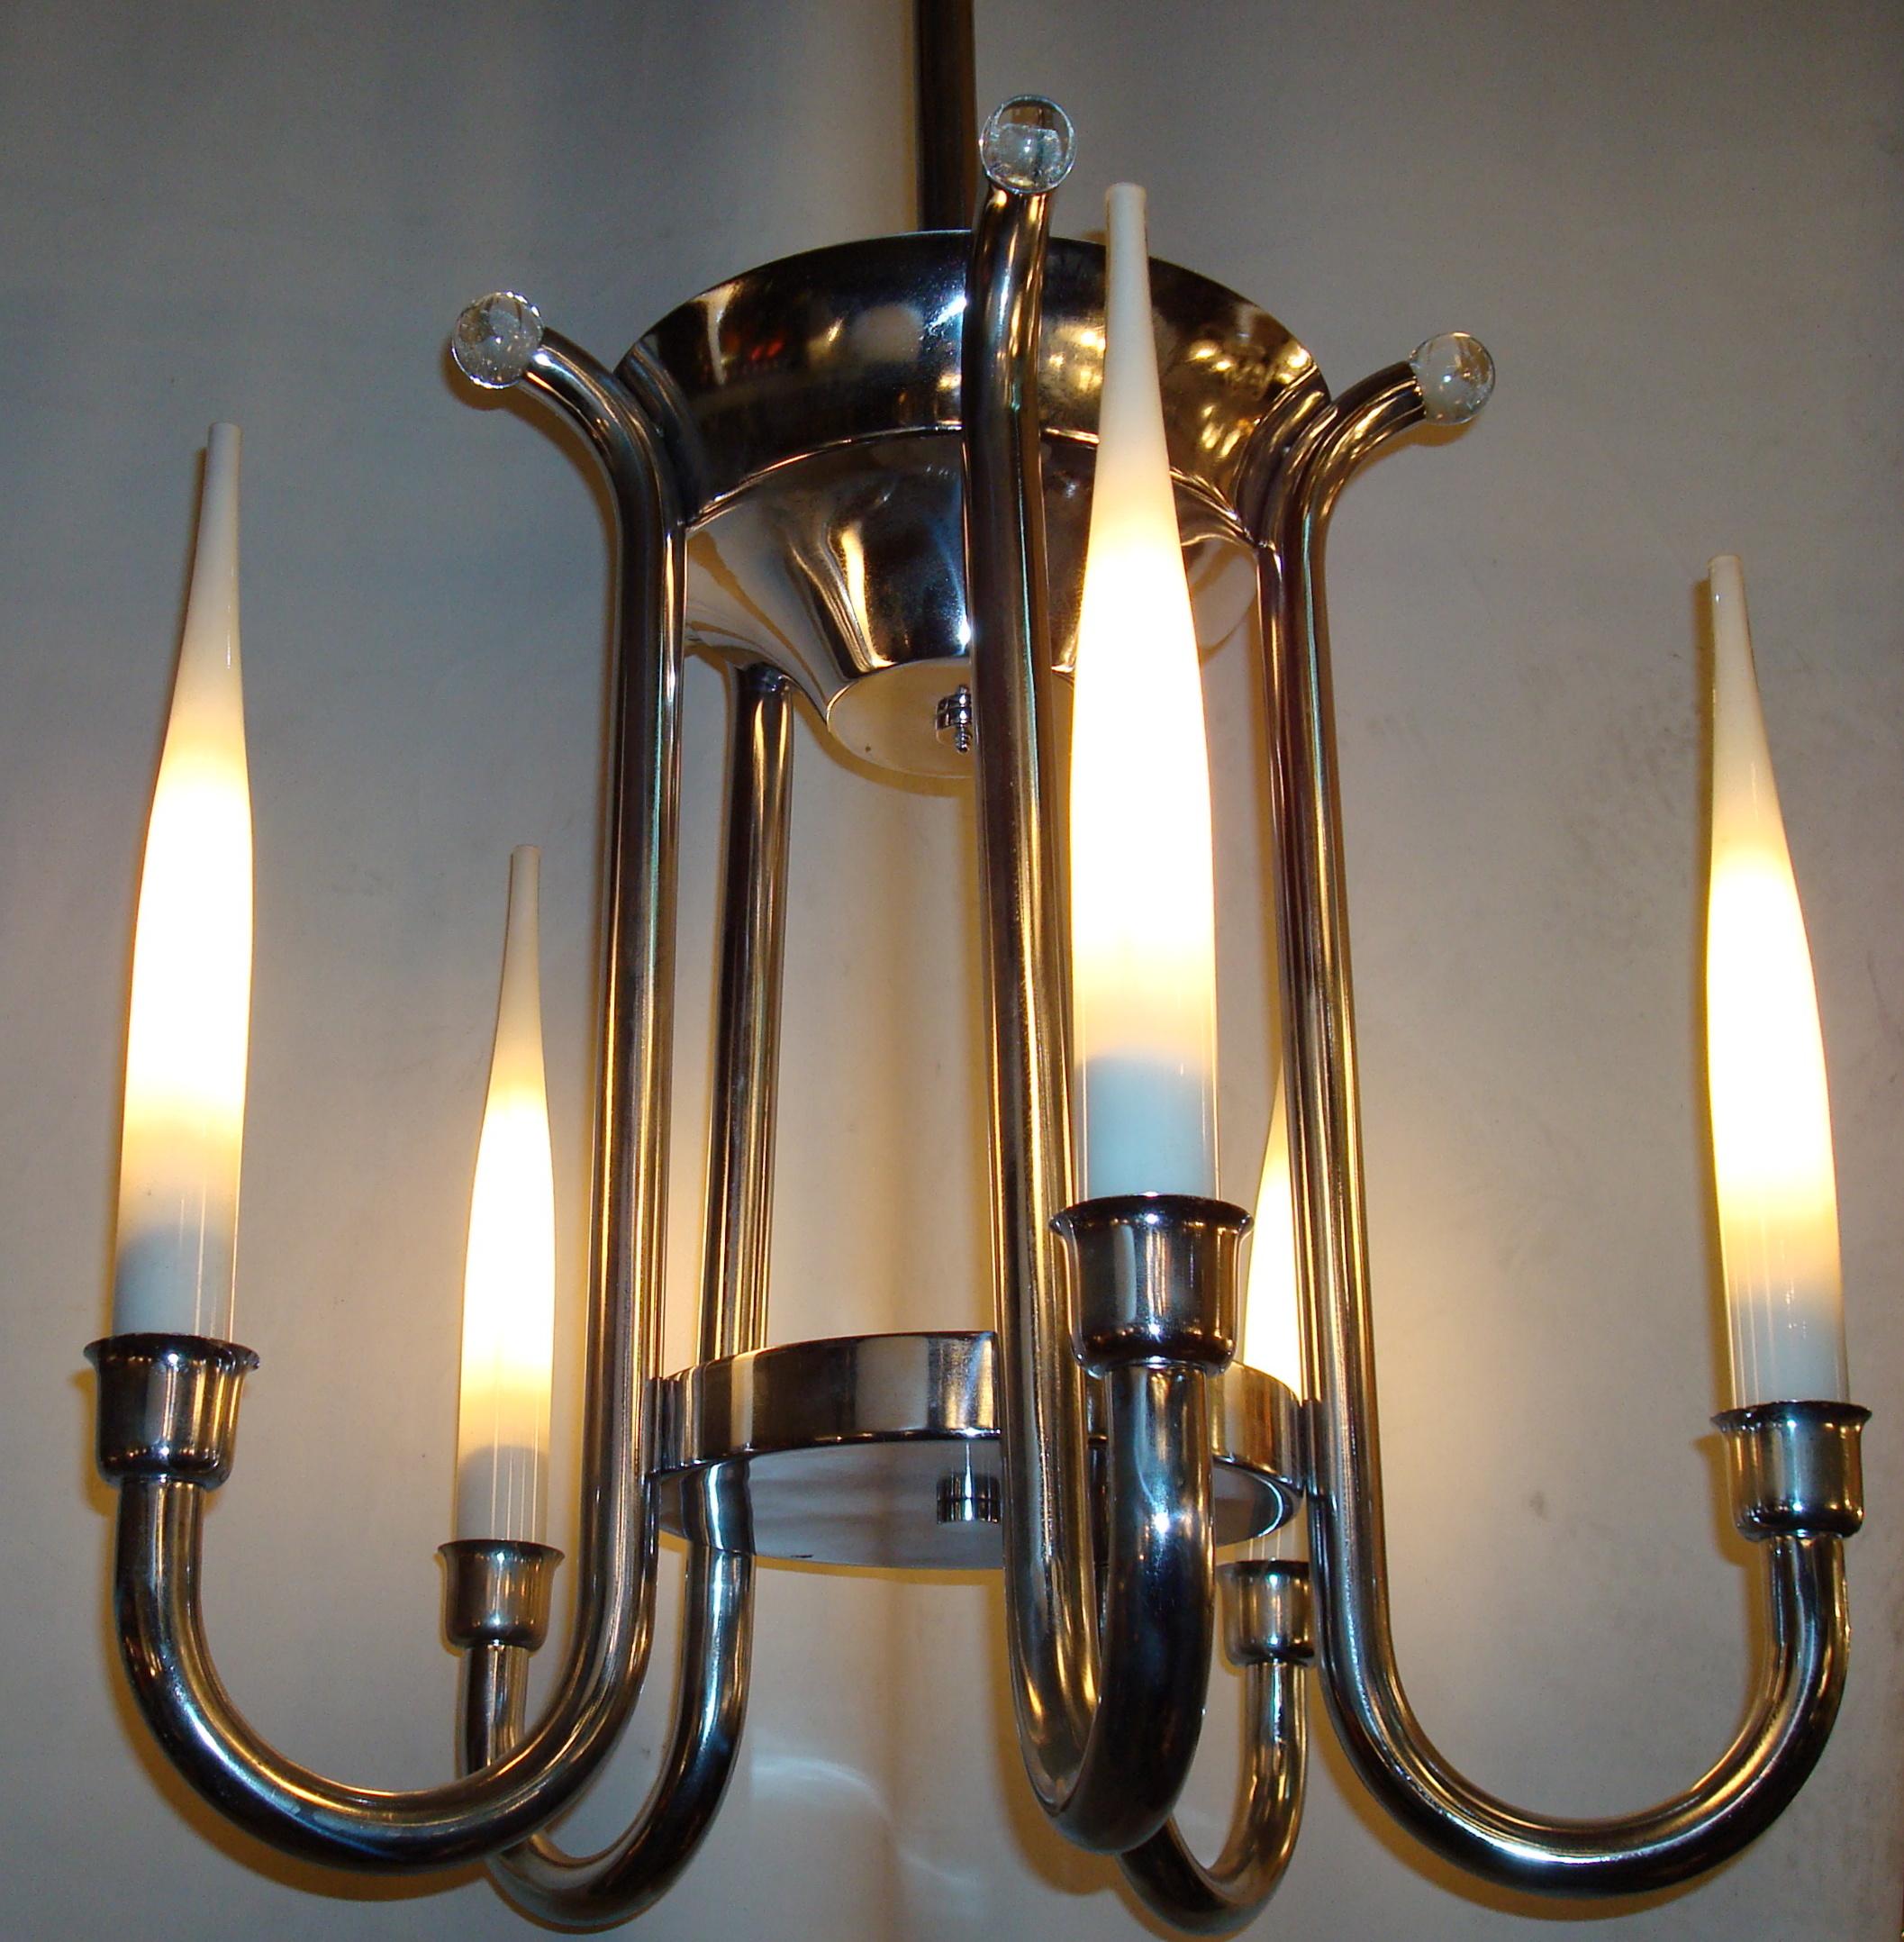 German Incredible Lamp with Opaline Candles, Chromed Bronze, 1920, Style Art Deco For Sale